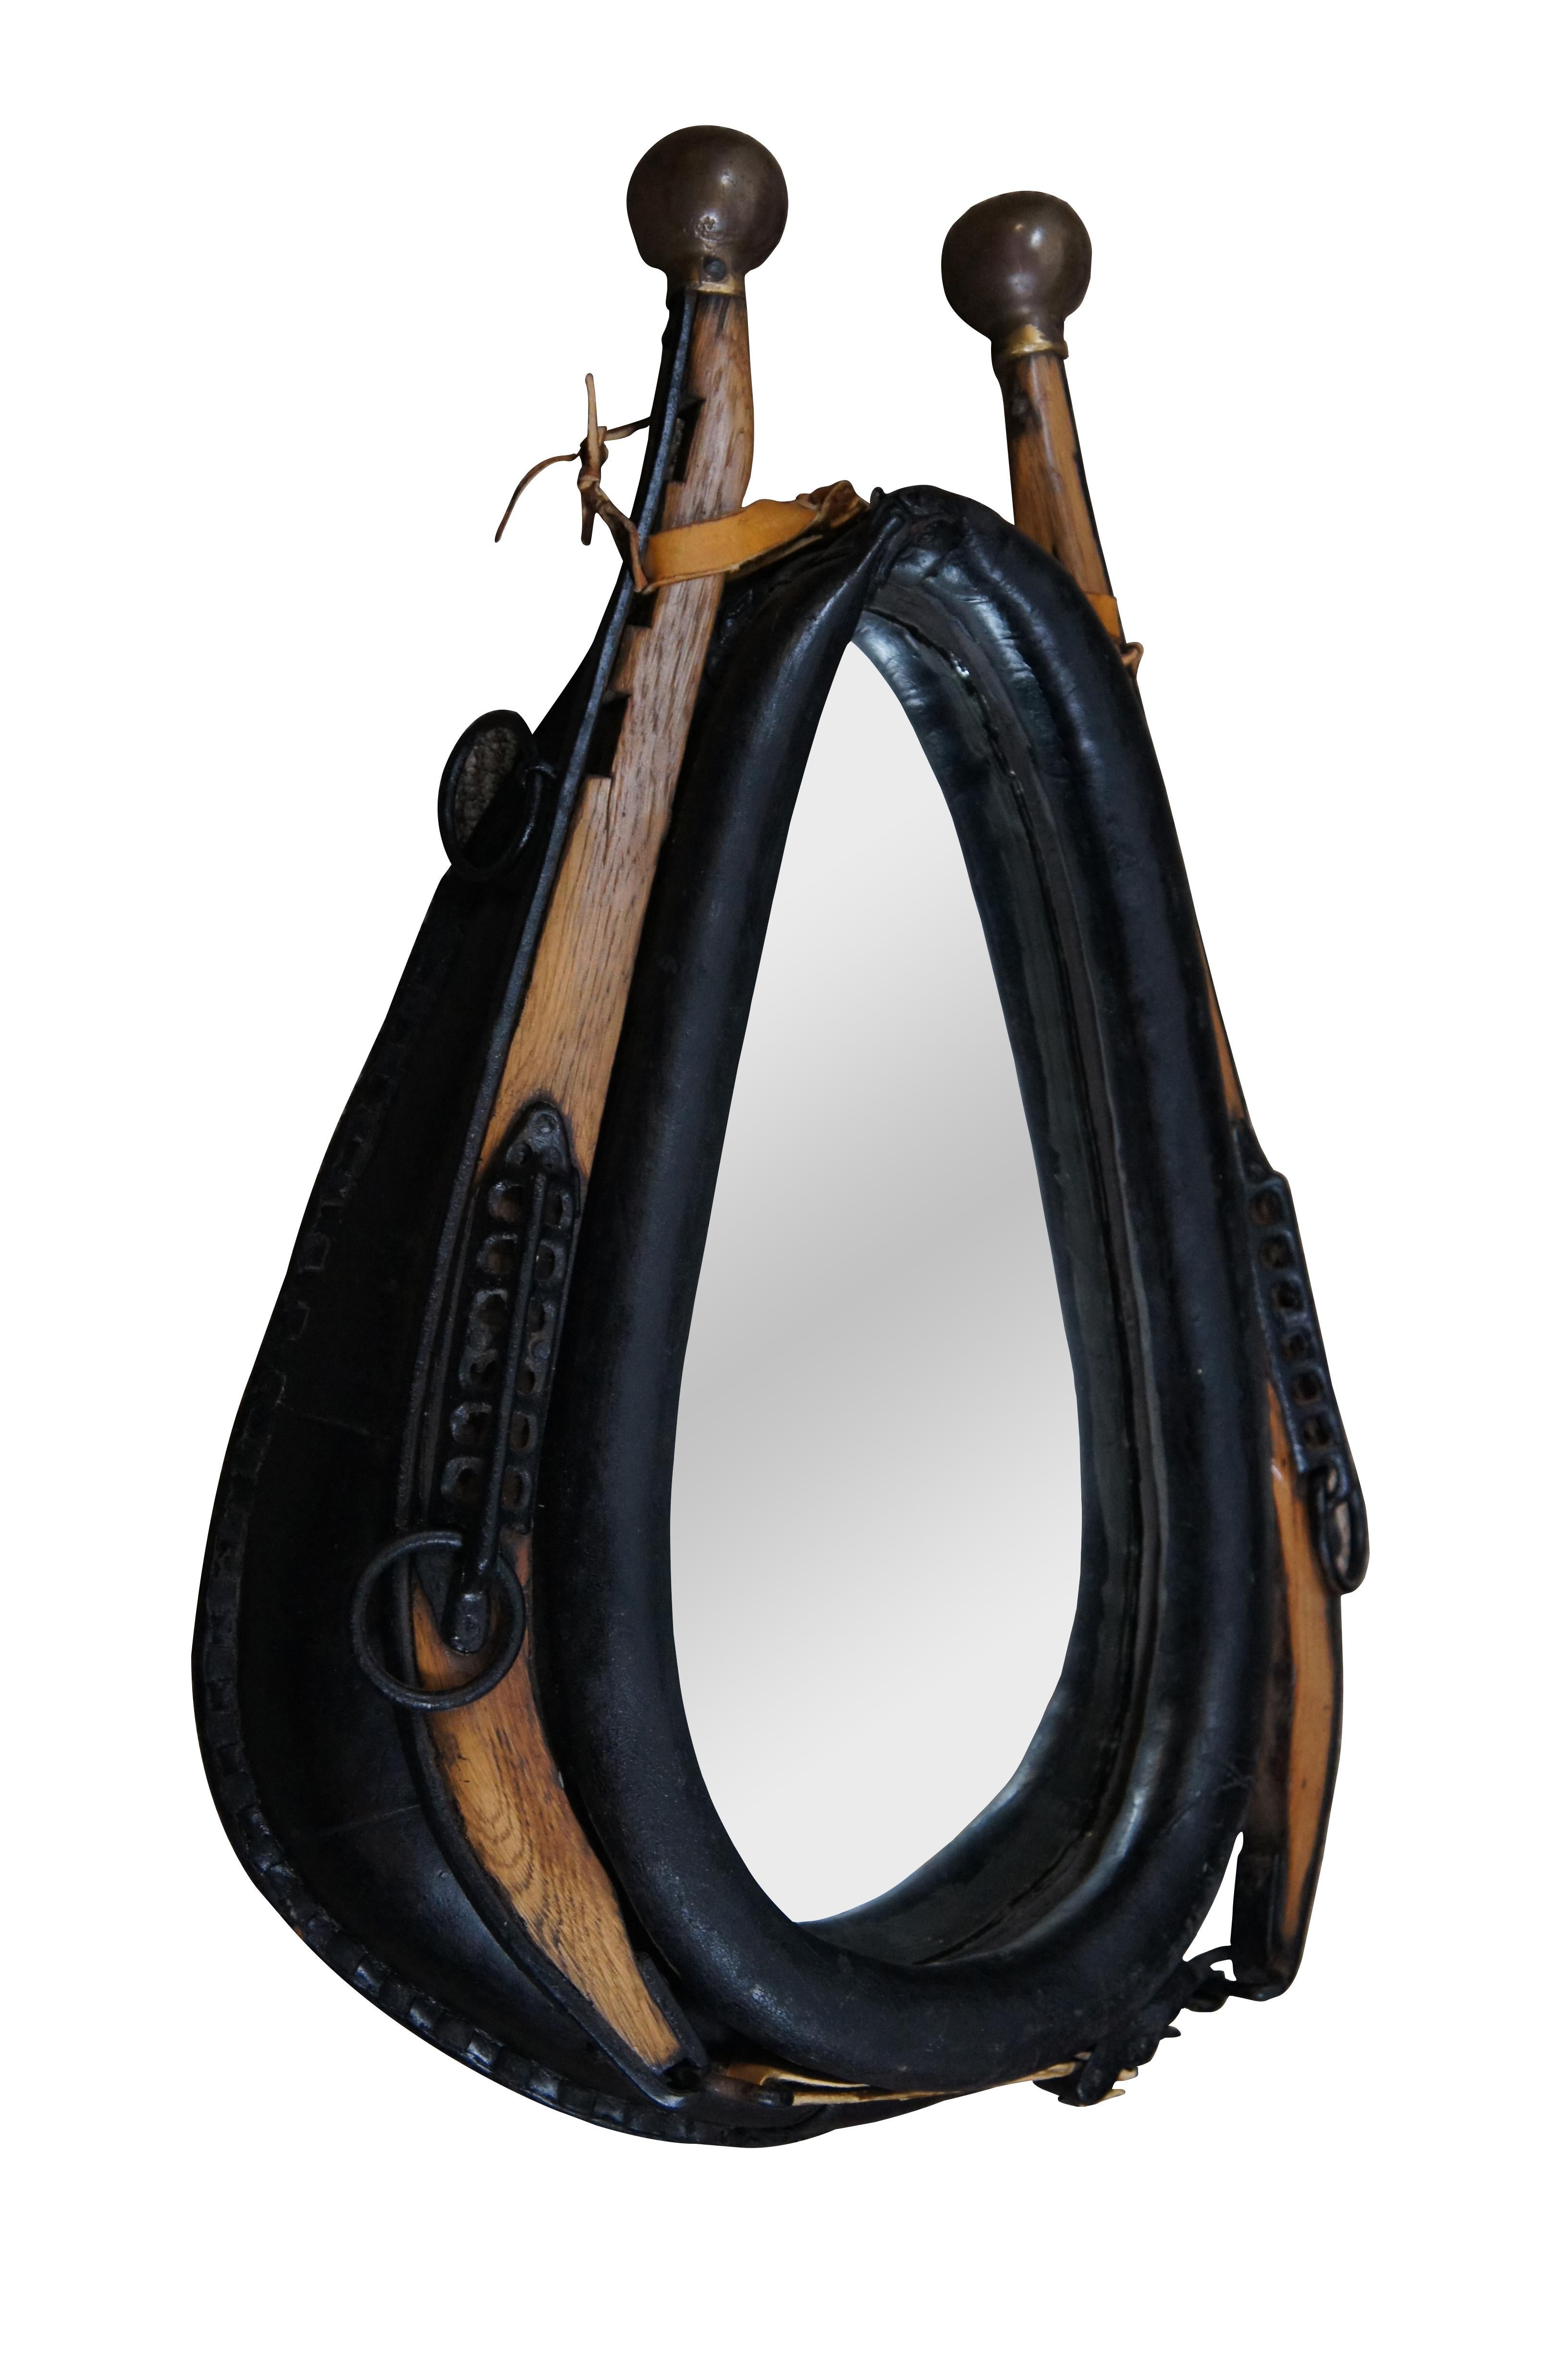 Vintage rustic equestrian egg shaped wall mirror by the Carolina Mirror Corporation, framed in a wood and black leather horse yoke / driving collar with iron hardware and brass ball tips.